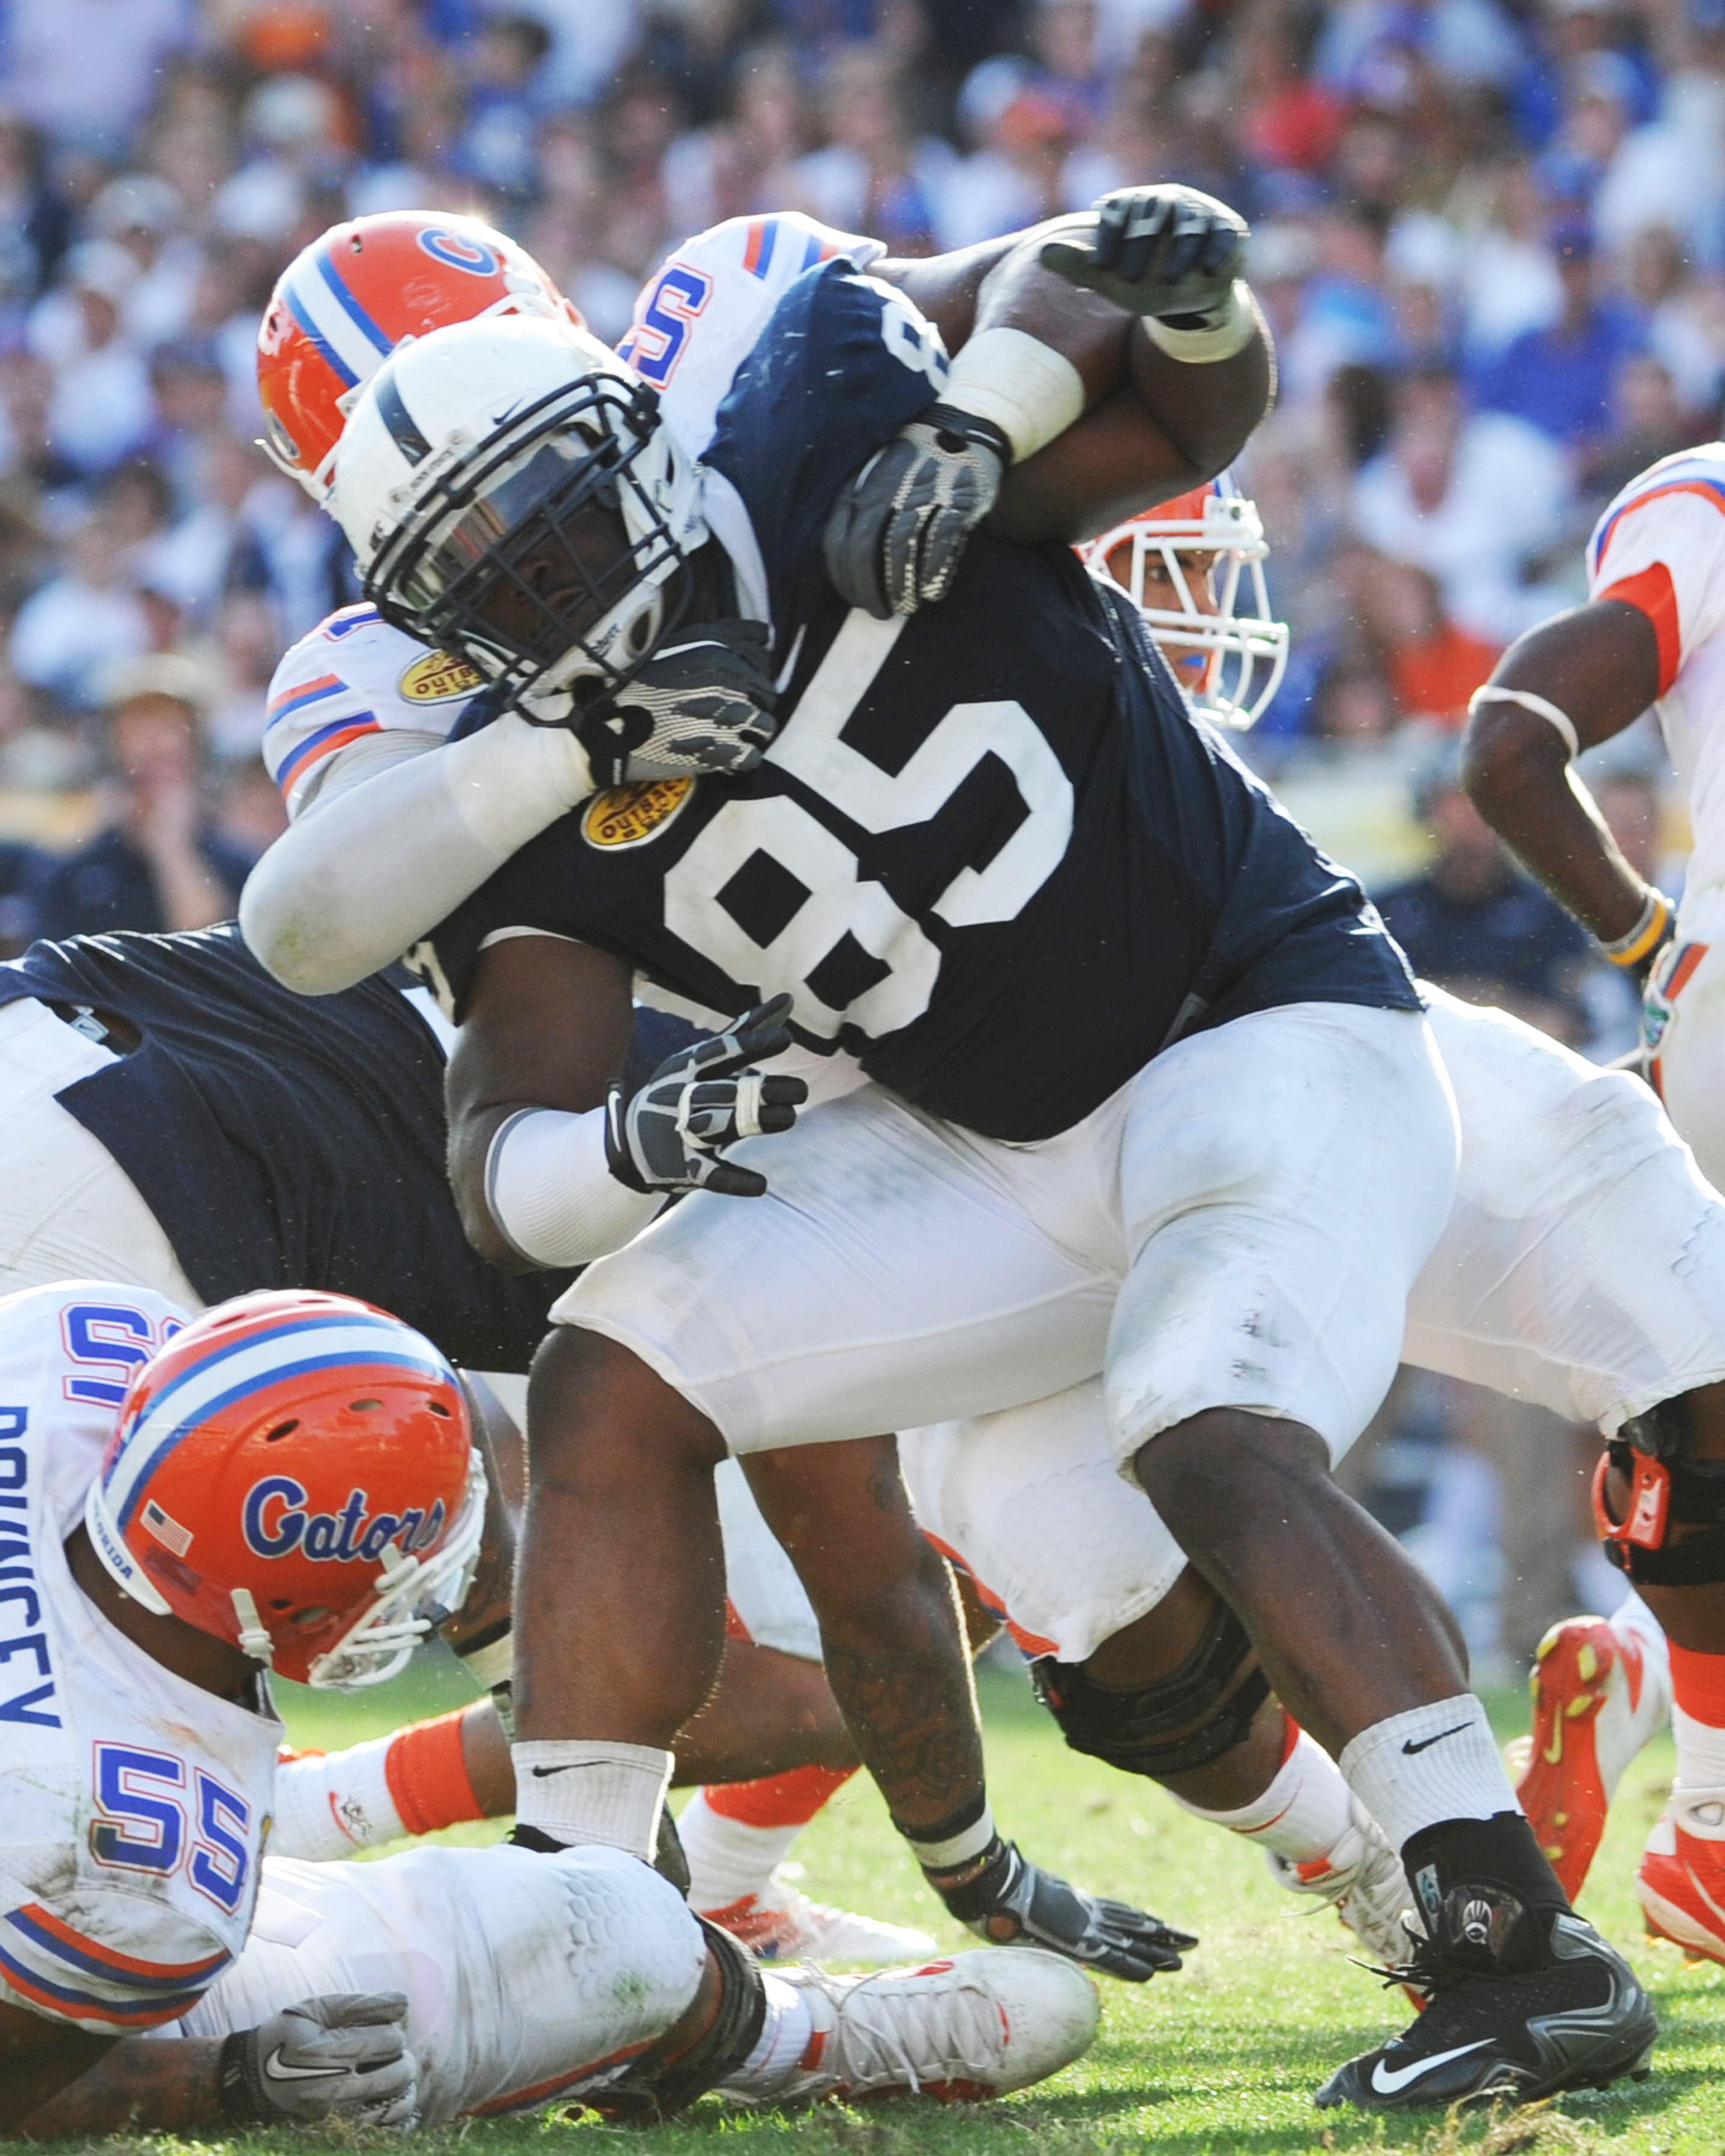 TAMPA, FL - JANUARY 1:  Defensive tackle Ollie Ogbu #85 of the Penn State Nittany Lions rushes the pocket against the Florida Gators January 1, 2010 in the 25th Outback Bowl at Raymond James Stadium in Tampa, Florida.  (Photo by Al Messerschmidt/Getty Ima